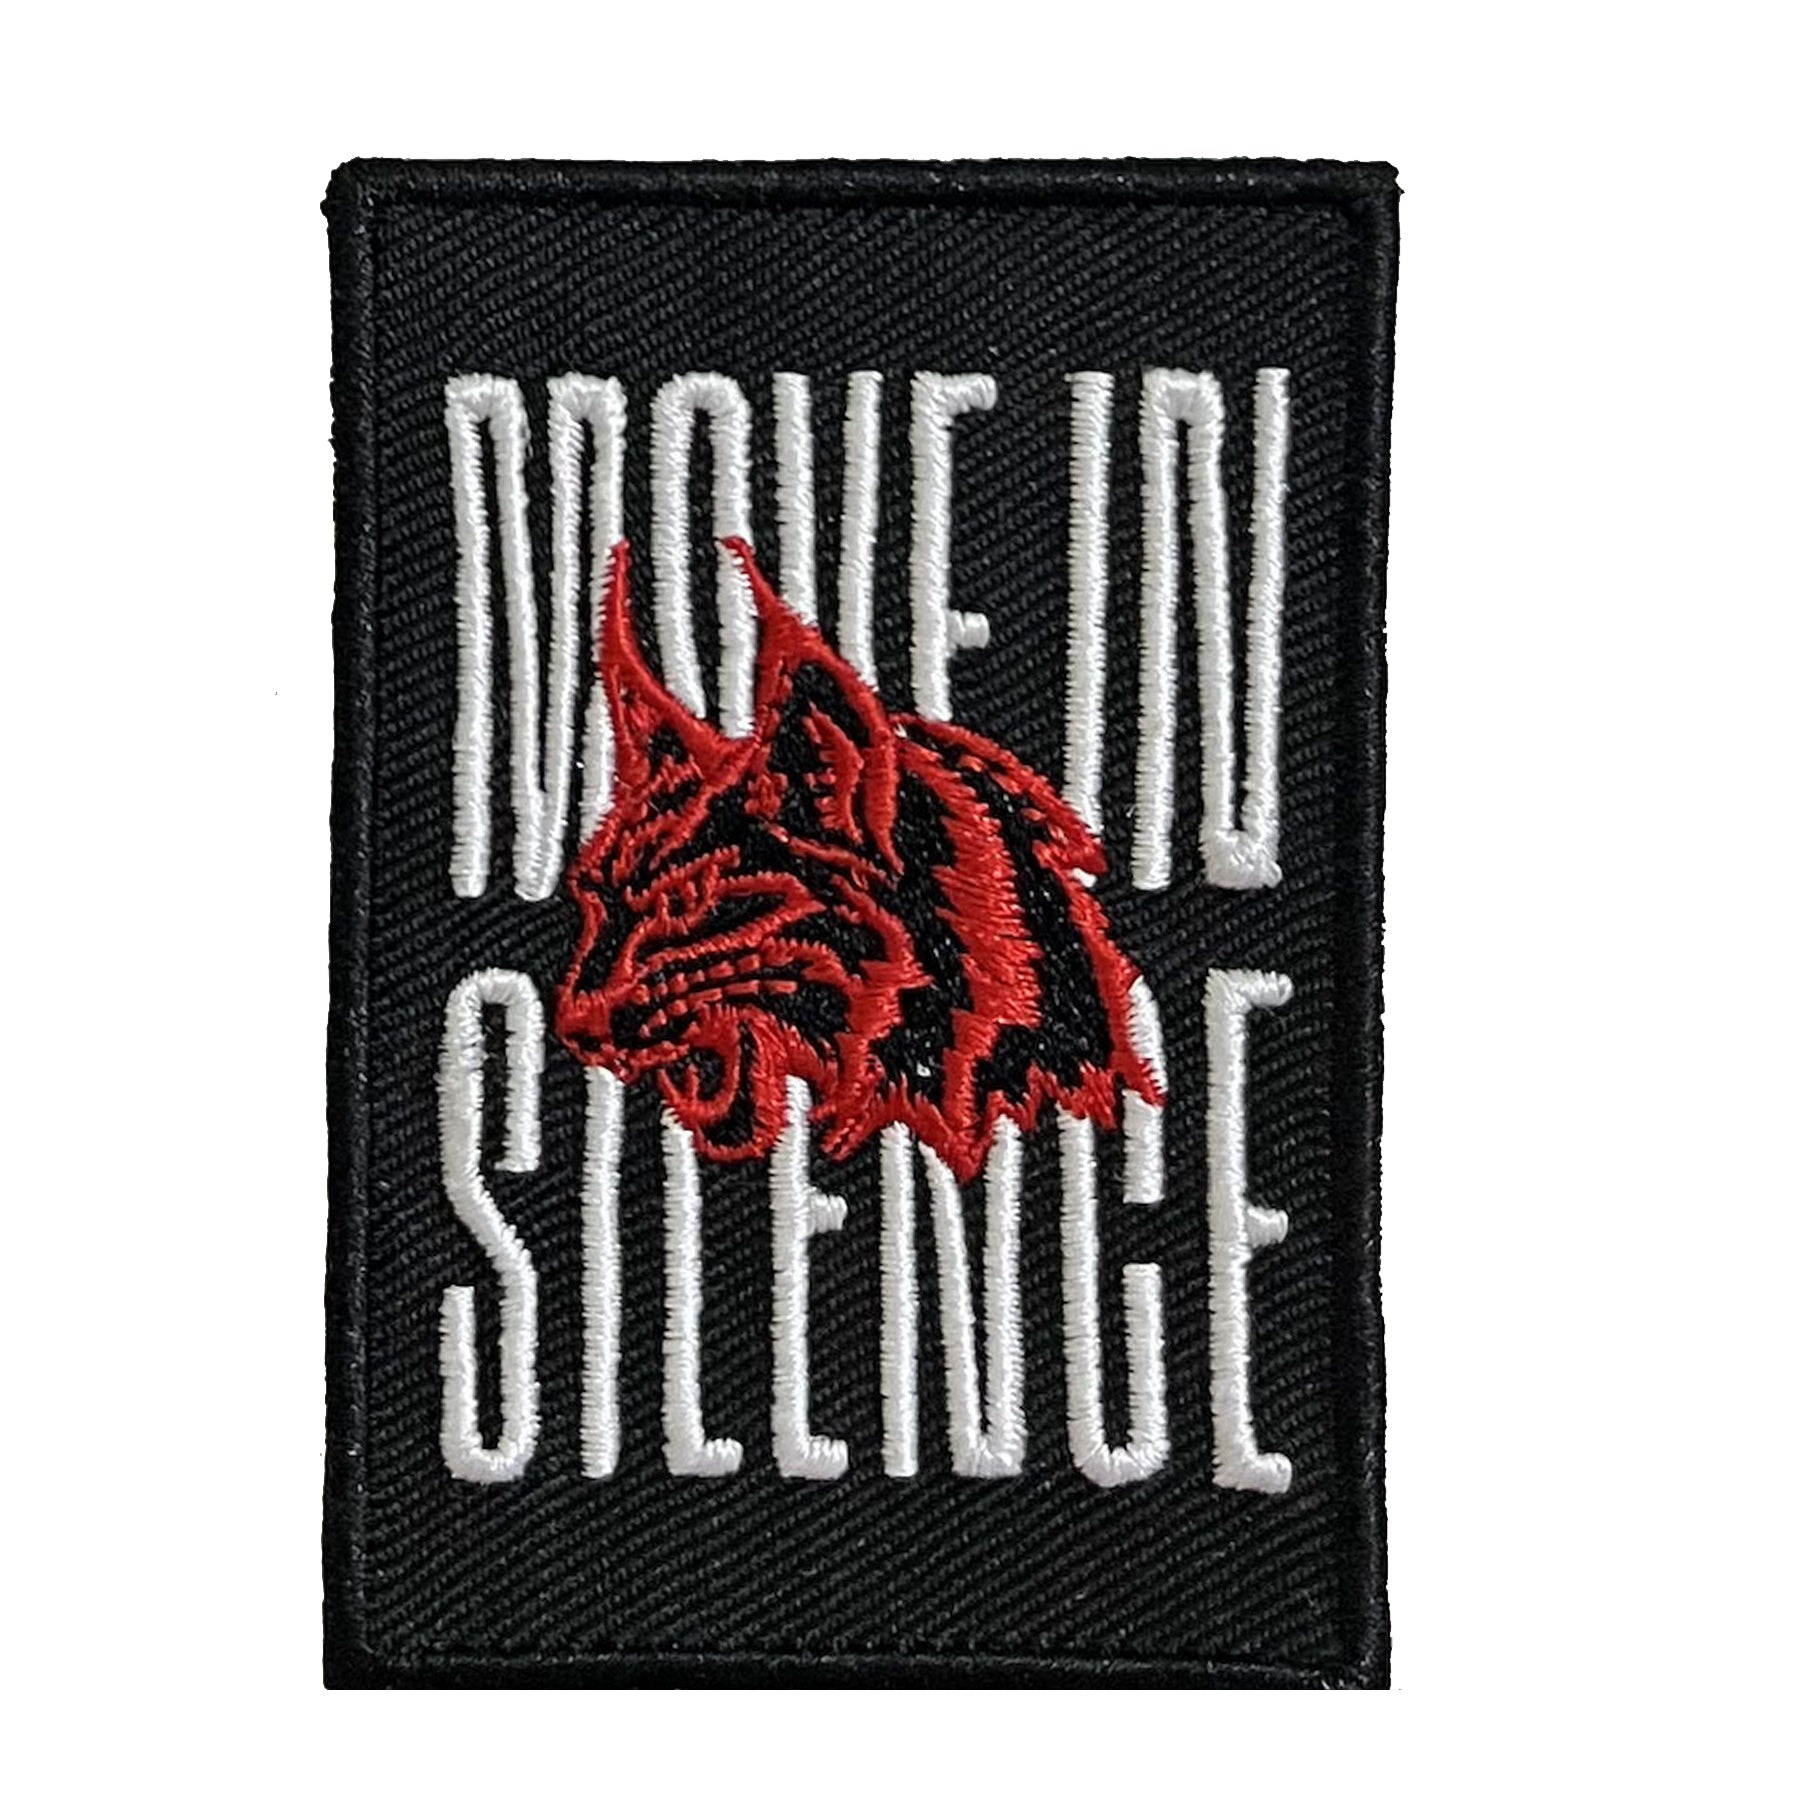 Move in Silence (Velcro Patch)